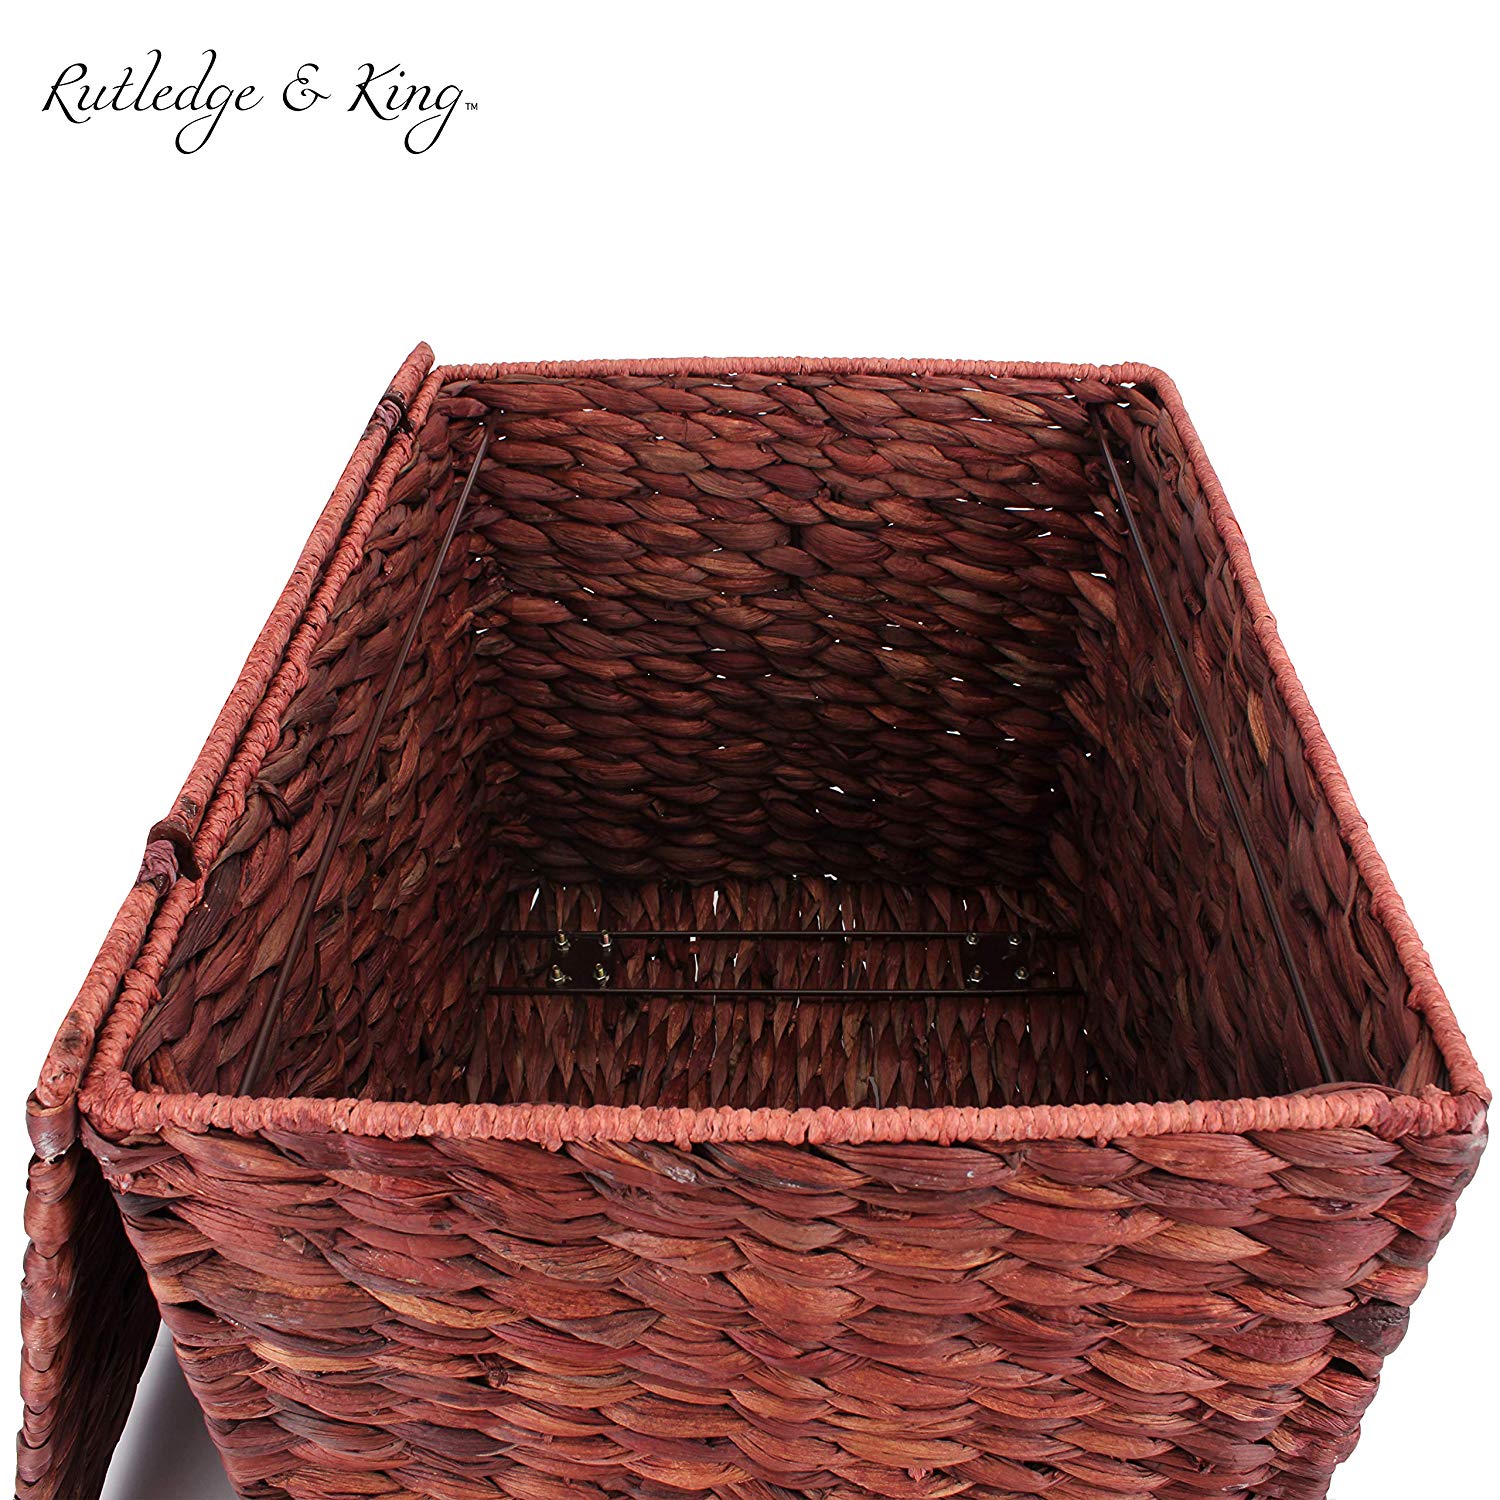 Seagrass Rolling File Cabinet - Home Filing Cabinet - Hanging File Organizer - Home and Office Wicker File Cabinet - Water Hyacinth Storage Basket for File Storage (Russet Brown) … - image 4 of 4